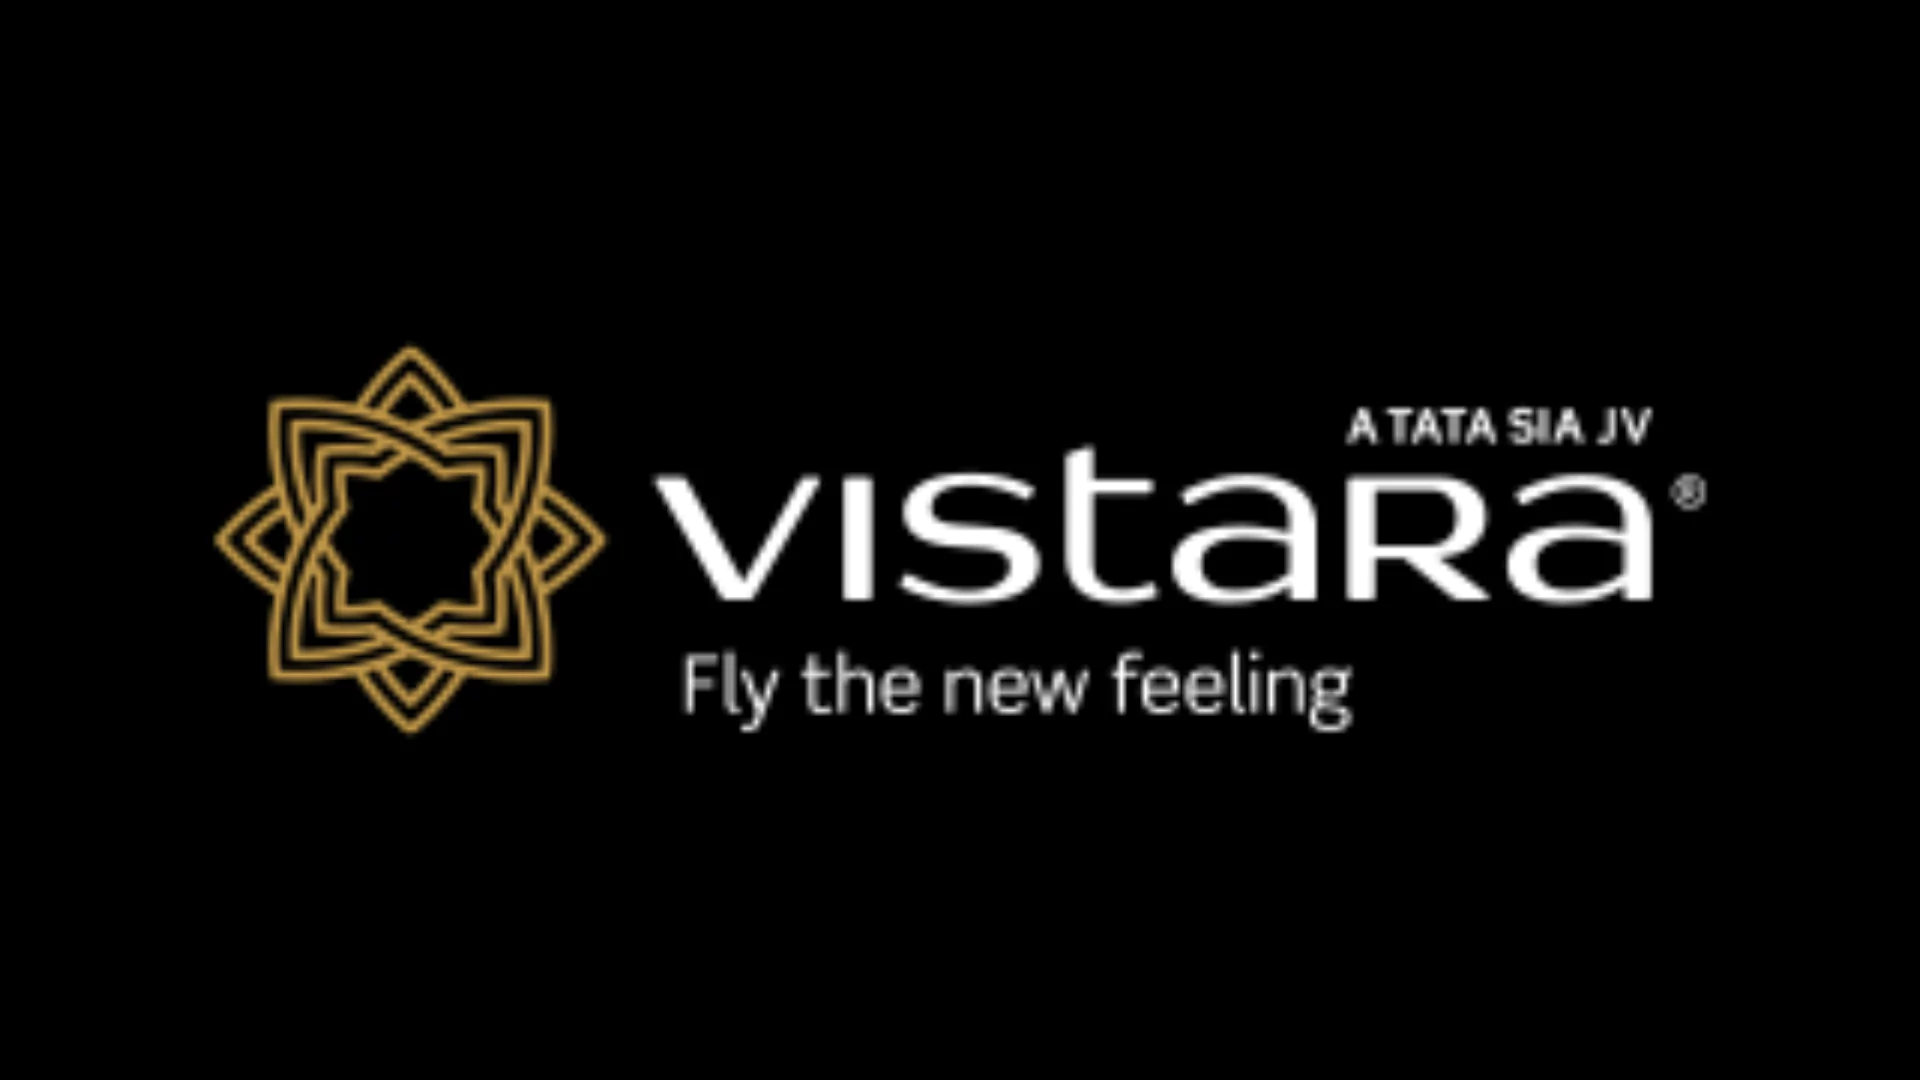 Vistara World | Enjoy our selection of movies, TV shows and music for this  month on #VistaraWorld, our complimentary in-flight entertainment system.  #StreamOnBoard | By Vistara | Facebook